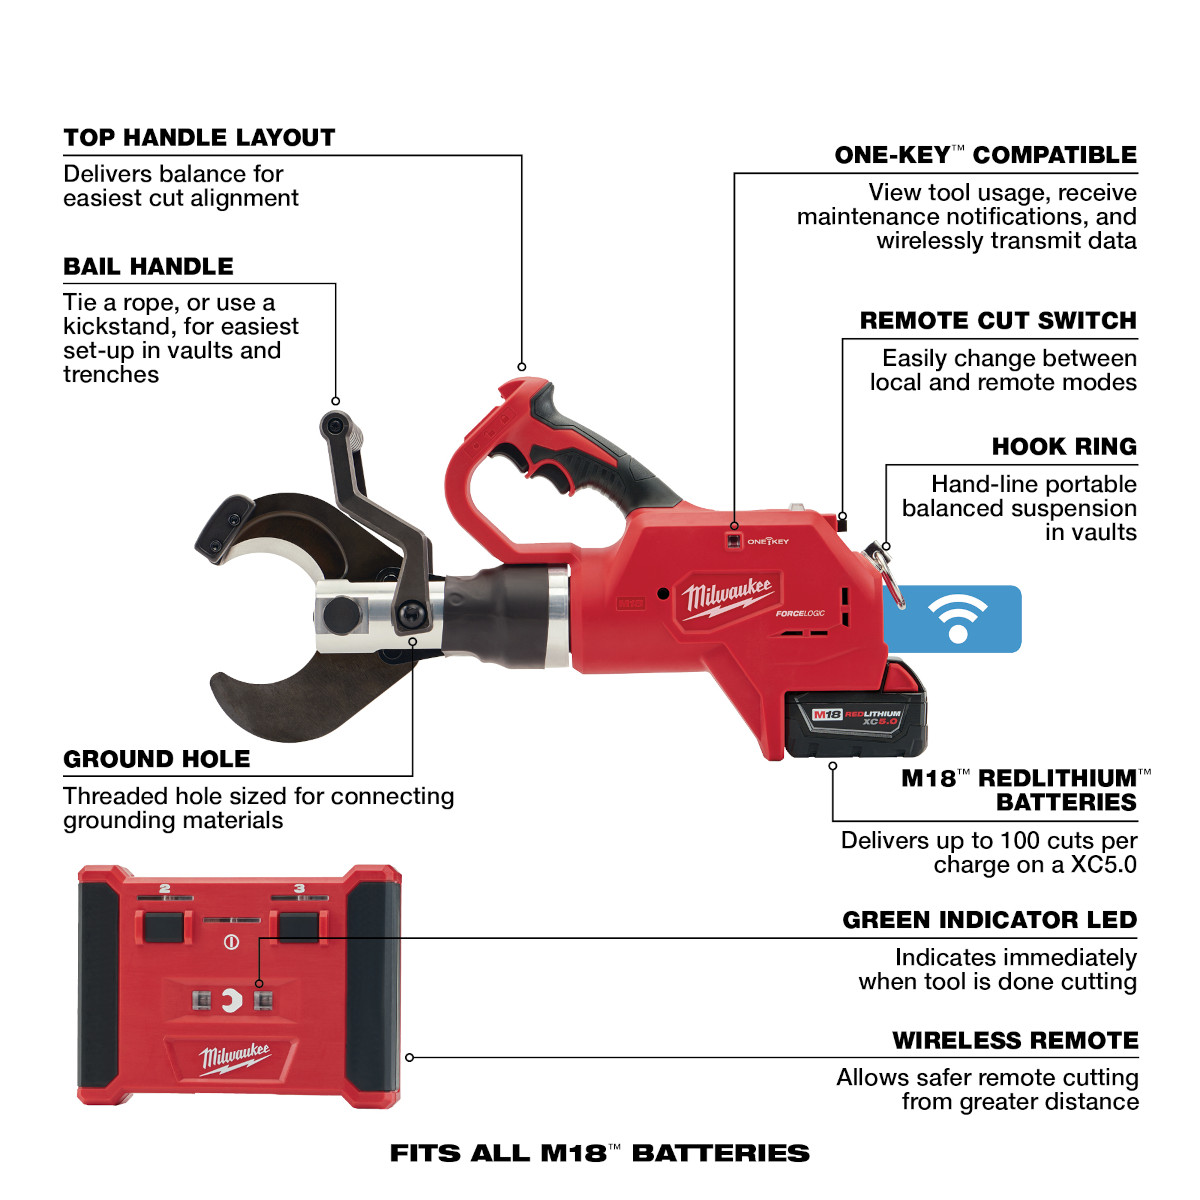 Milwaukee M18 FORCE LOGIC 3 Inch Underground Cable Cutter with Wireless Remote from GME Supply